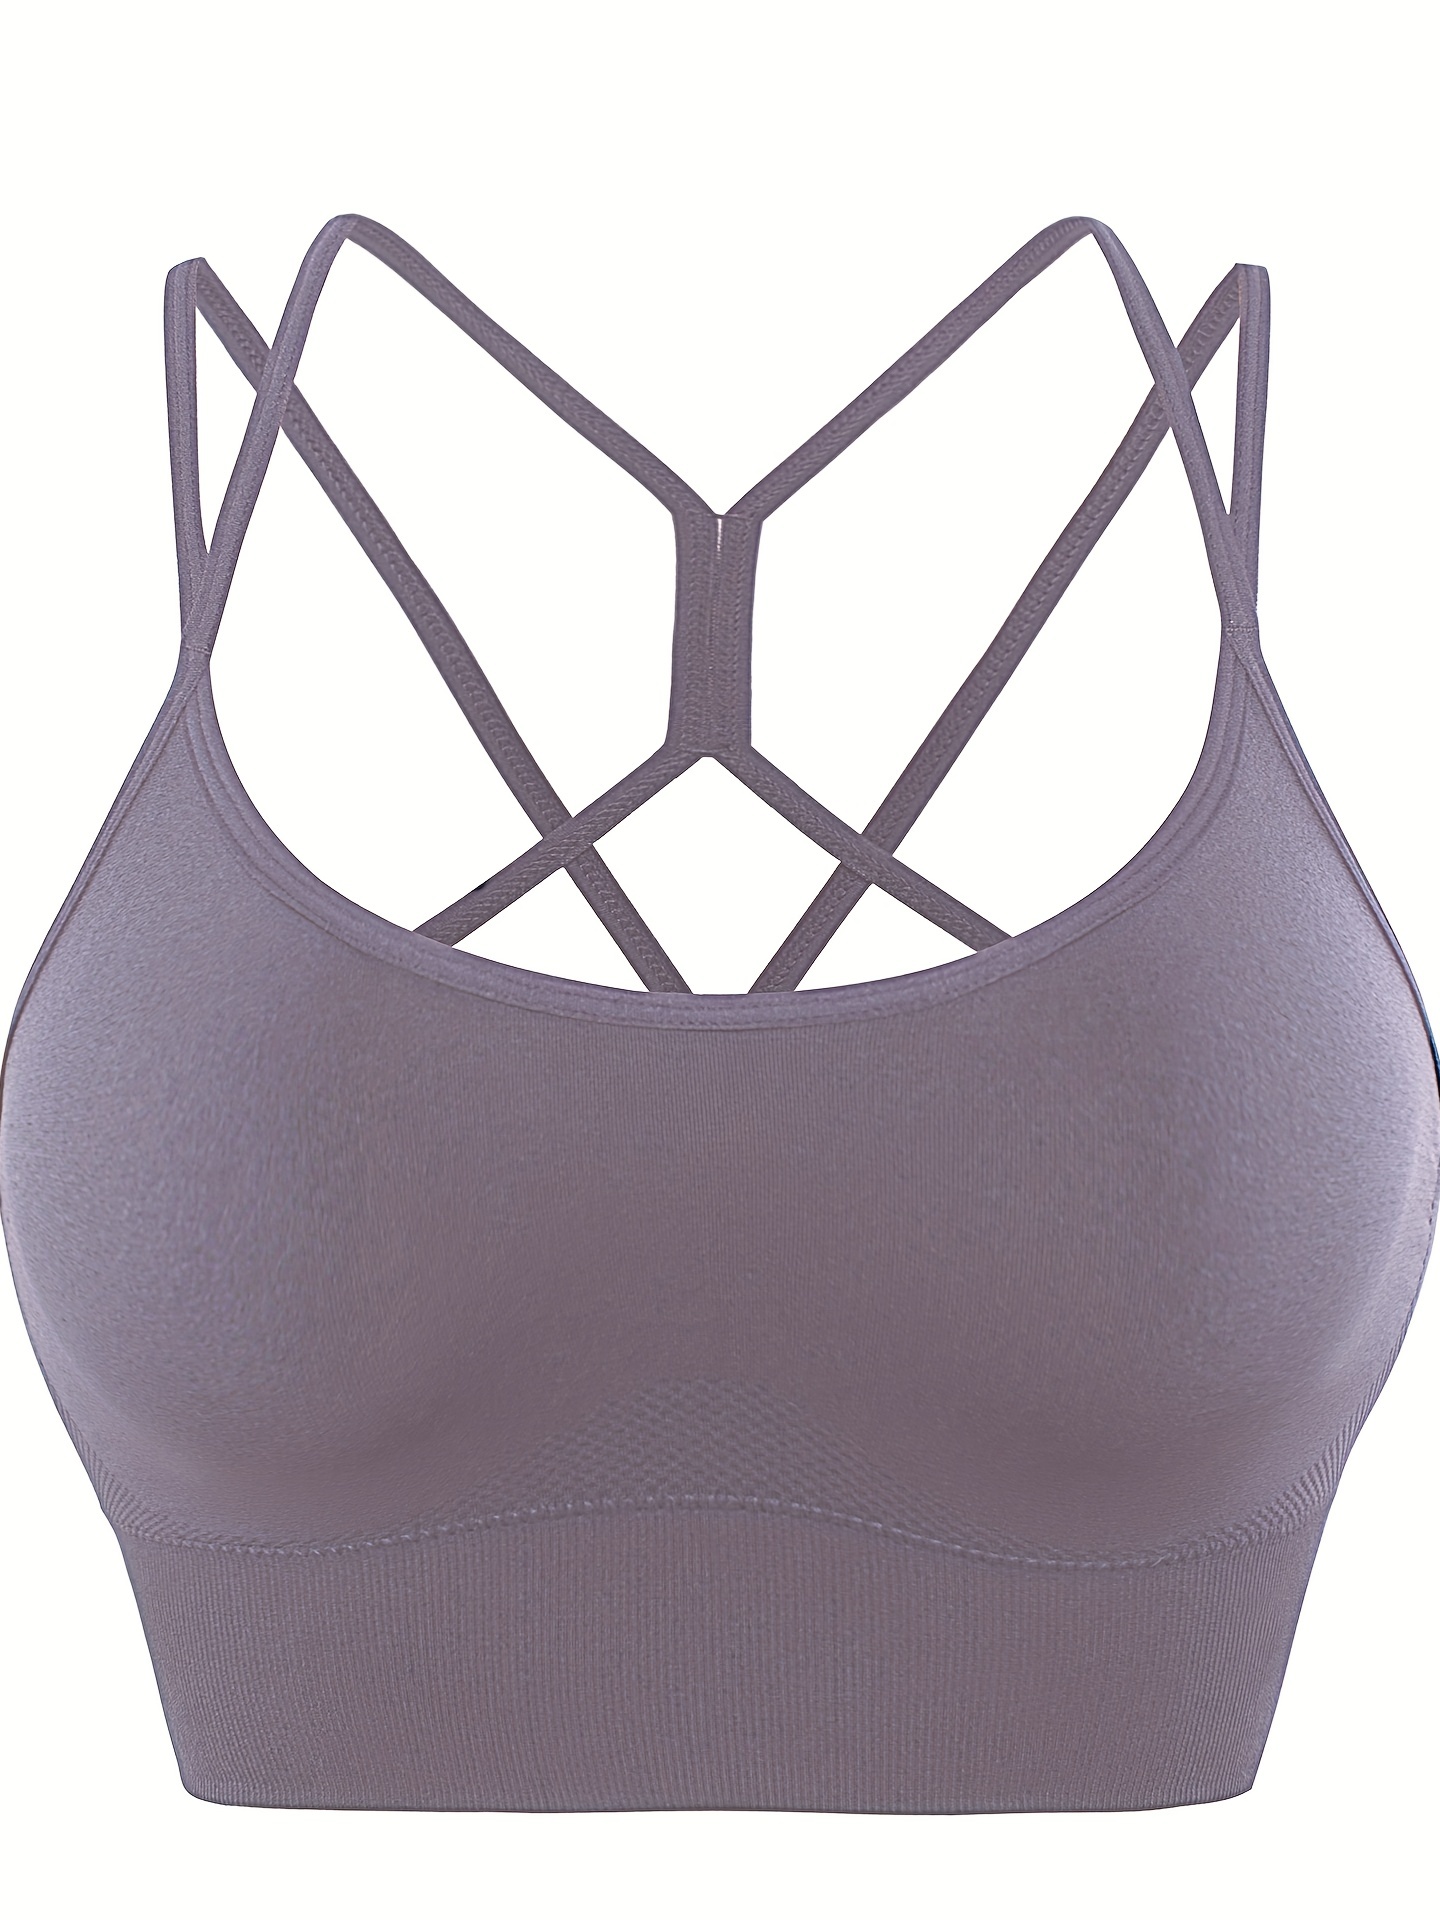 ABCDE Fitness WearYoga Dancing Sports halter corset, bra, small vest with  chest pads, new B 243